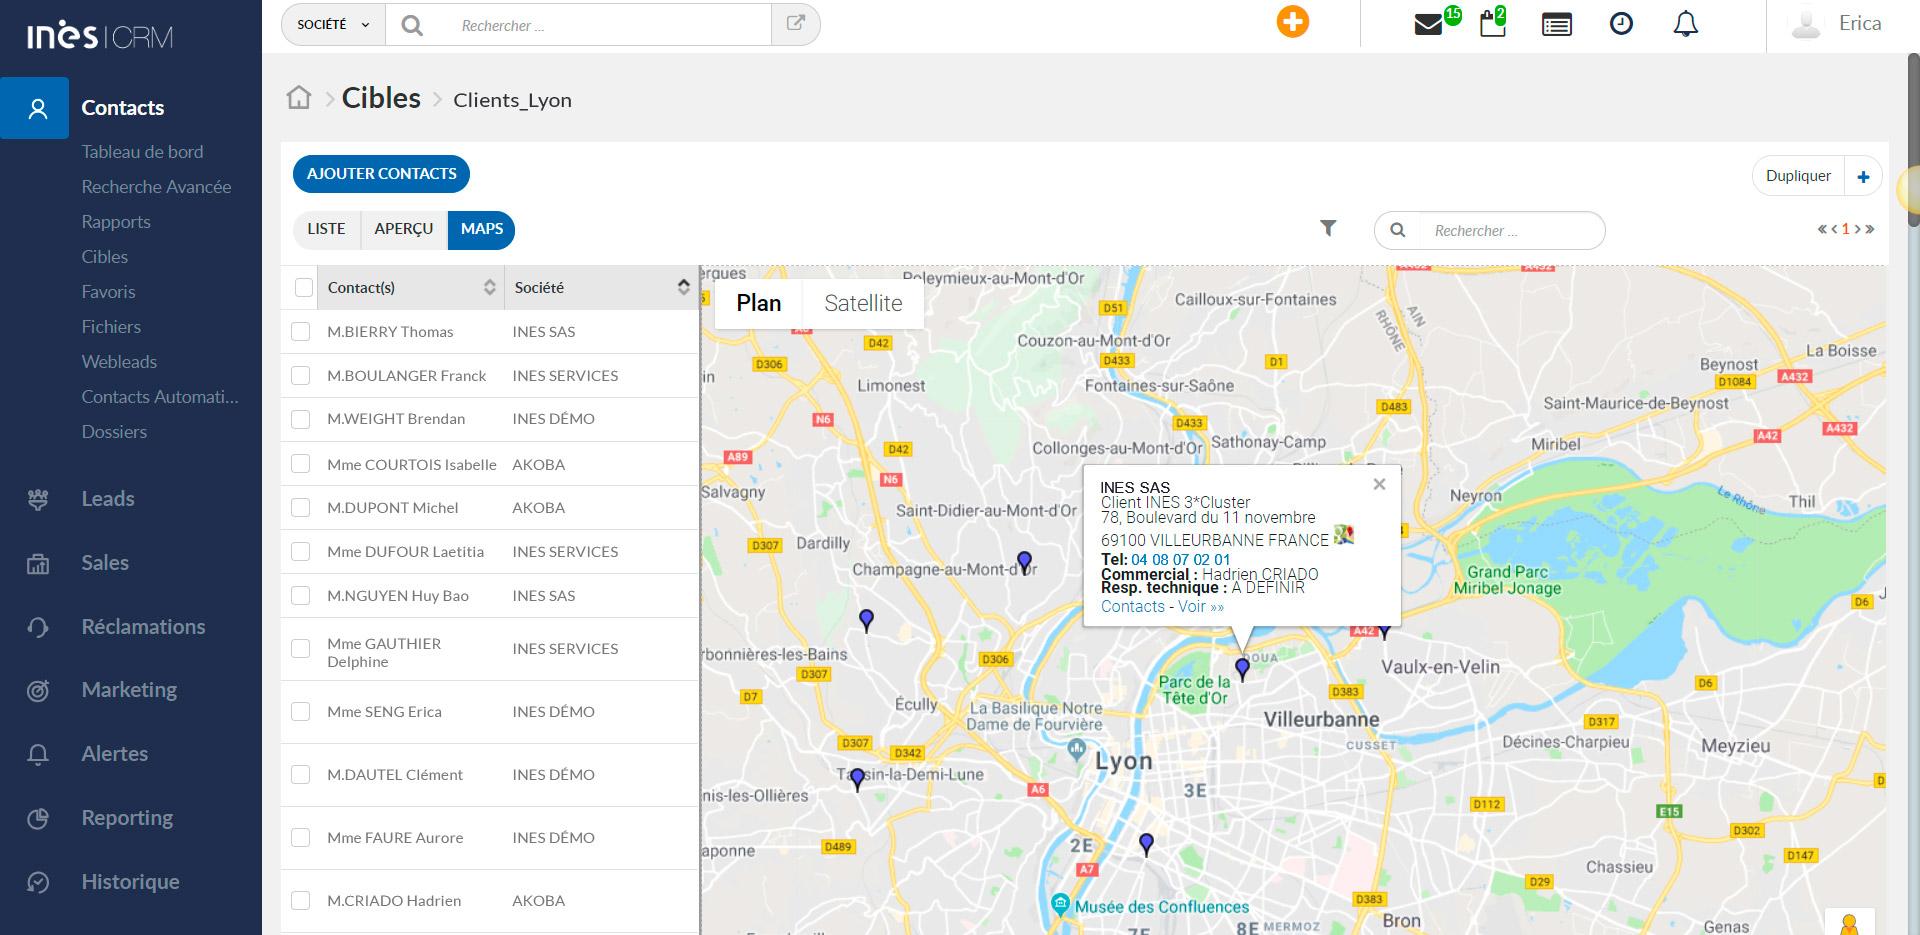 INES CRM by Efficy - INES CRM-autour de moi contact manager